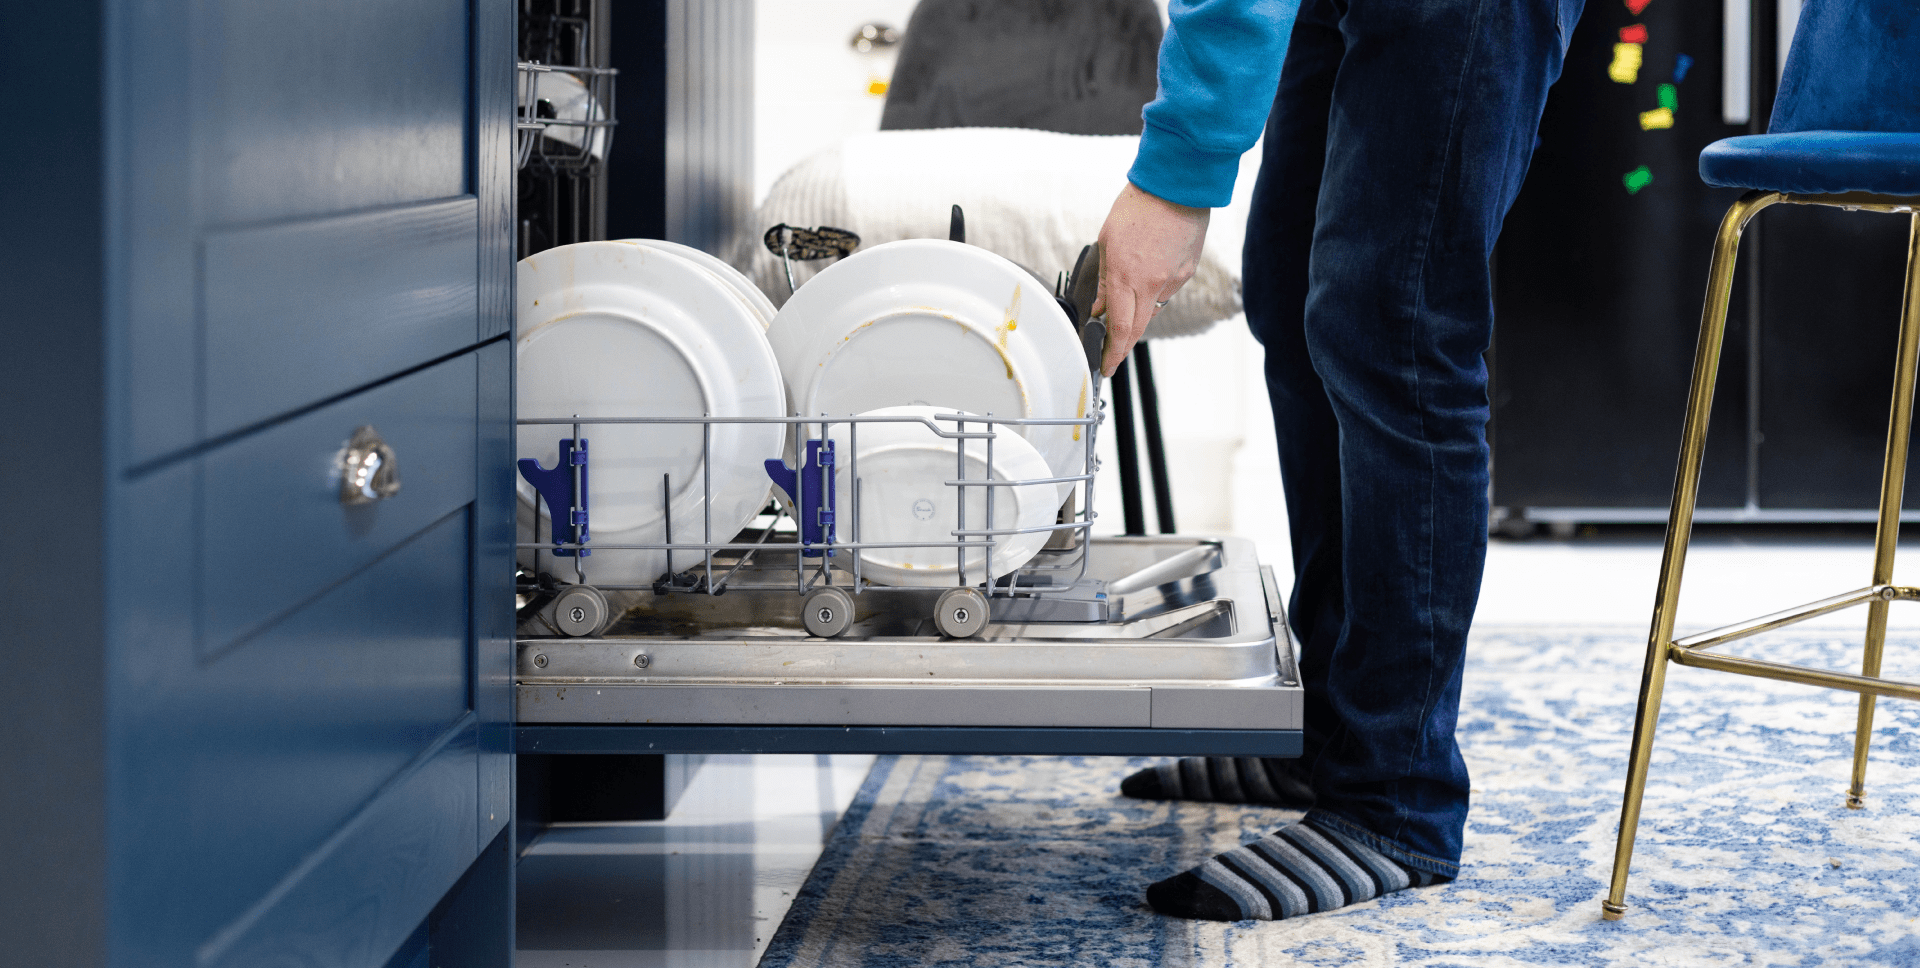 A person’s legs are visible as they load dirty dishes into the bottom rack of a dishwasher. 